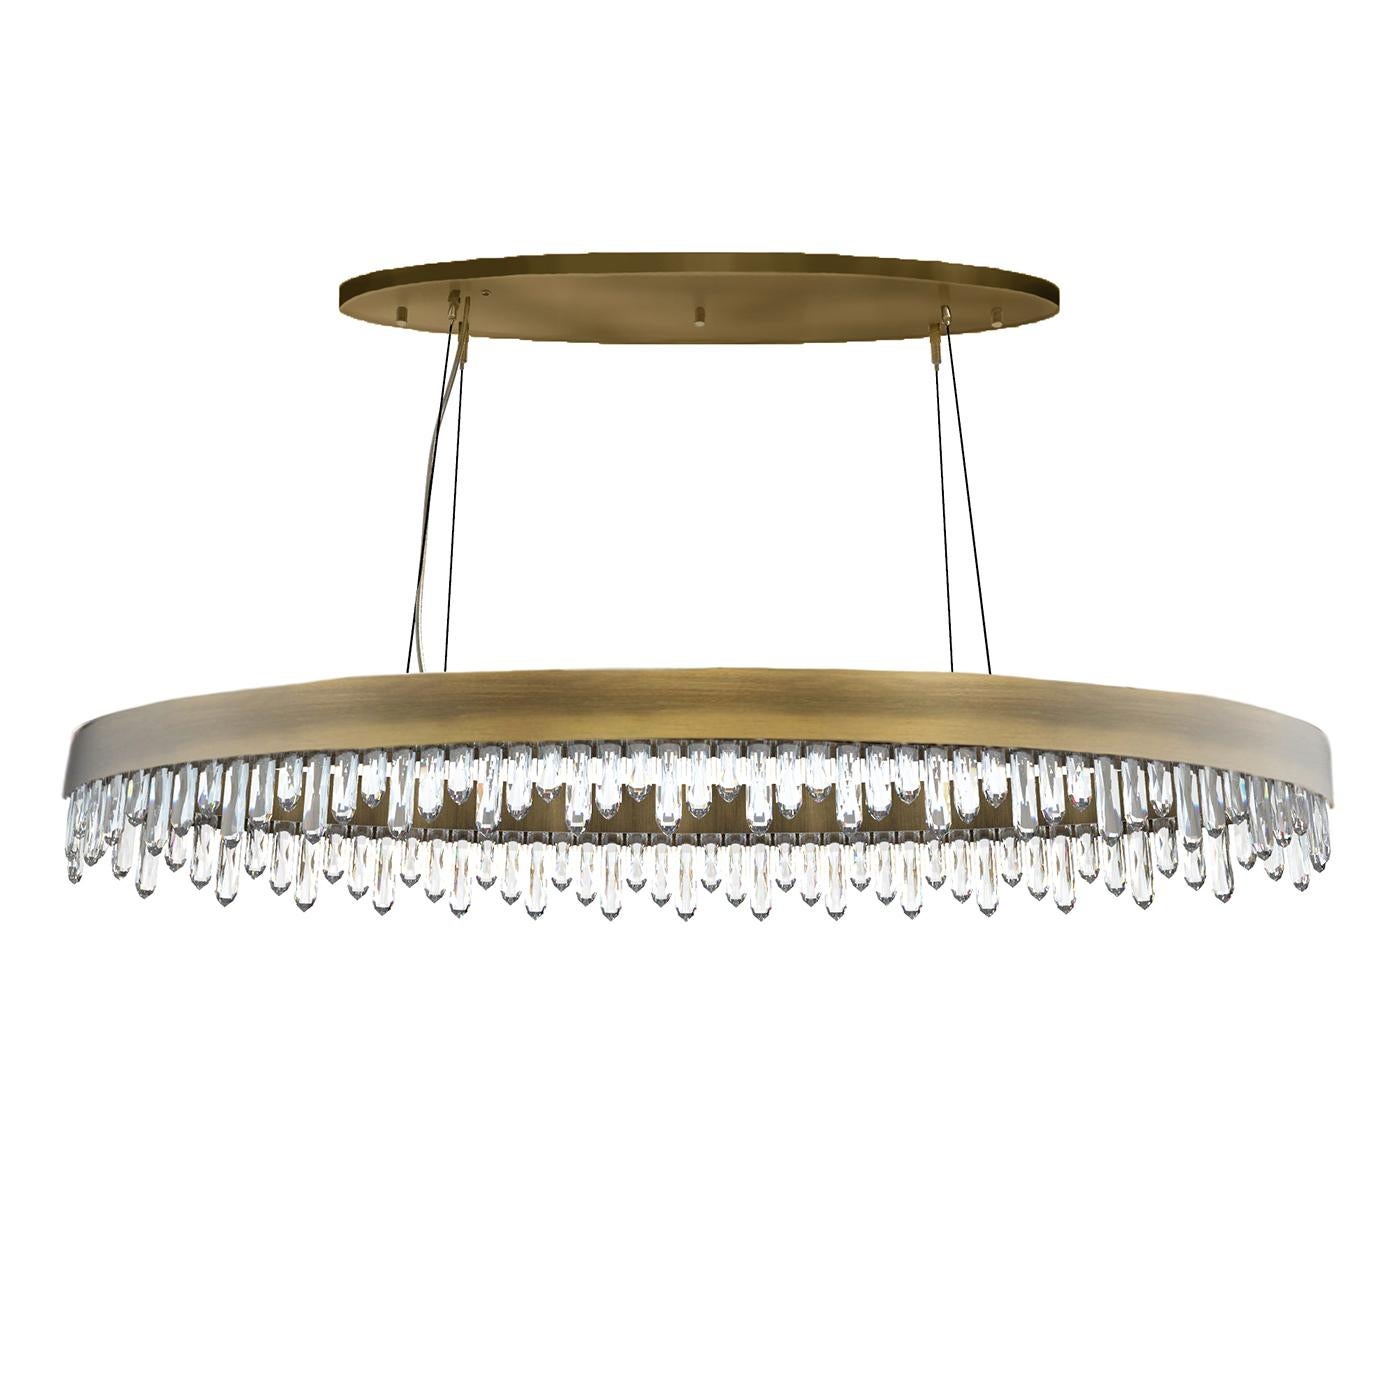 Suspension crystal sticks oval with carved quartz 
crystal sticks. Structure in solid brass in antique brushed 
finish. With led light included inside the ring structure.